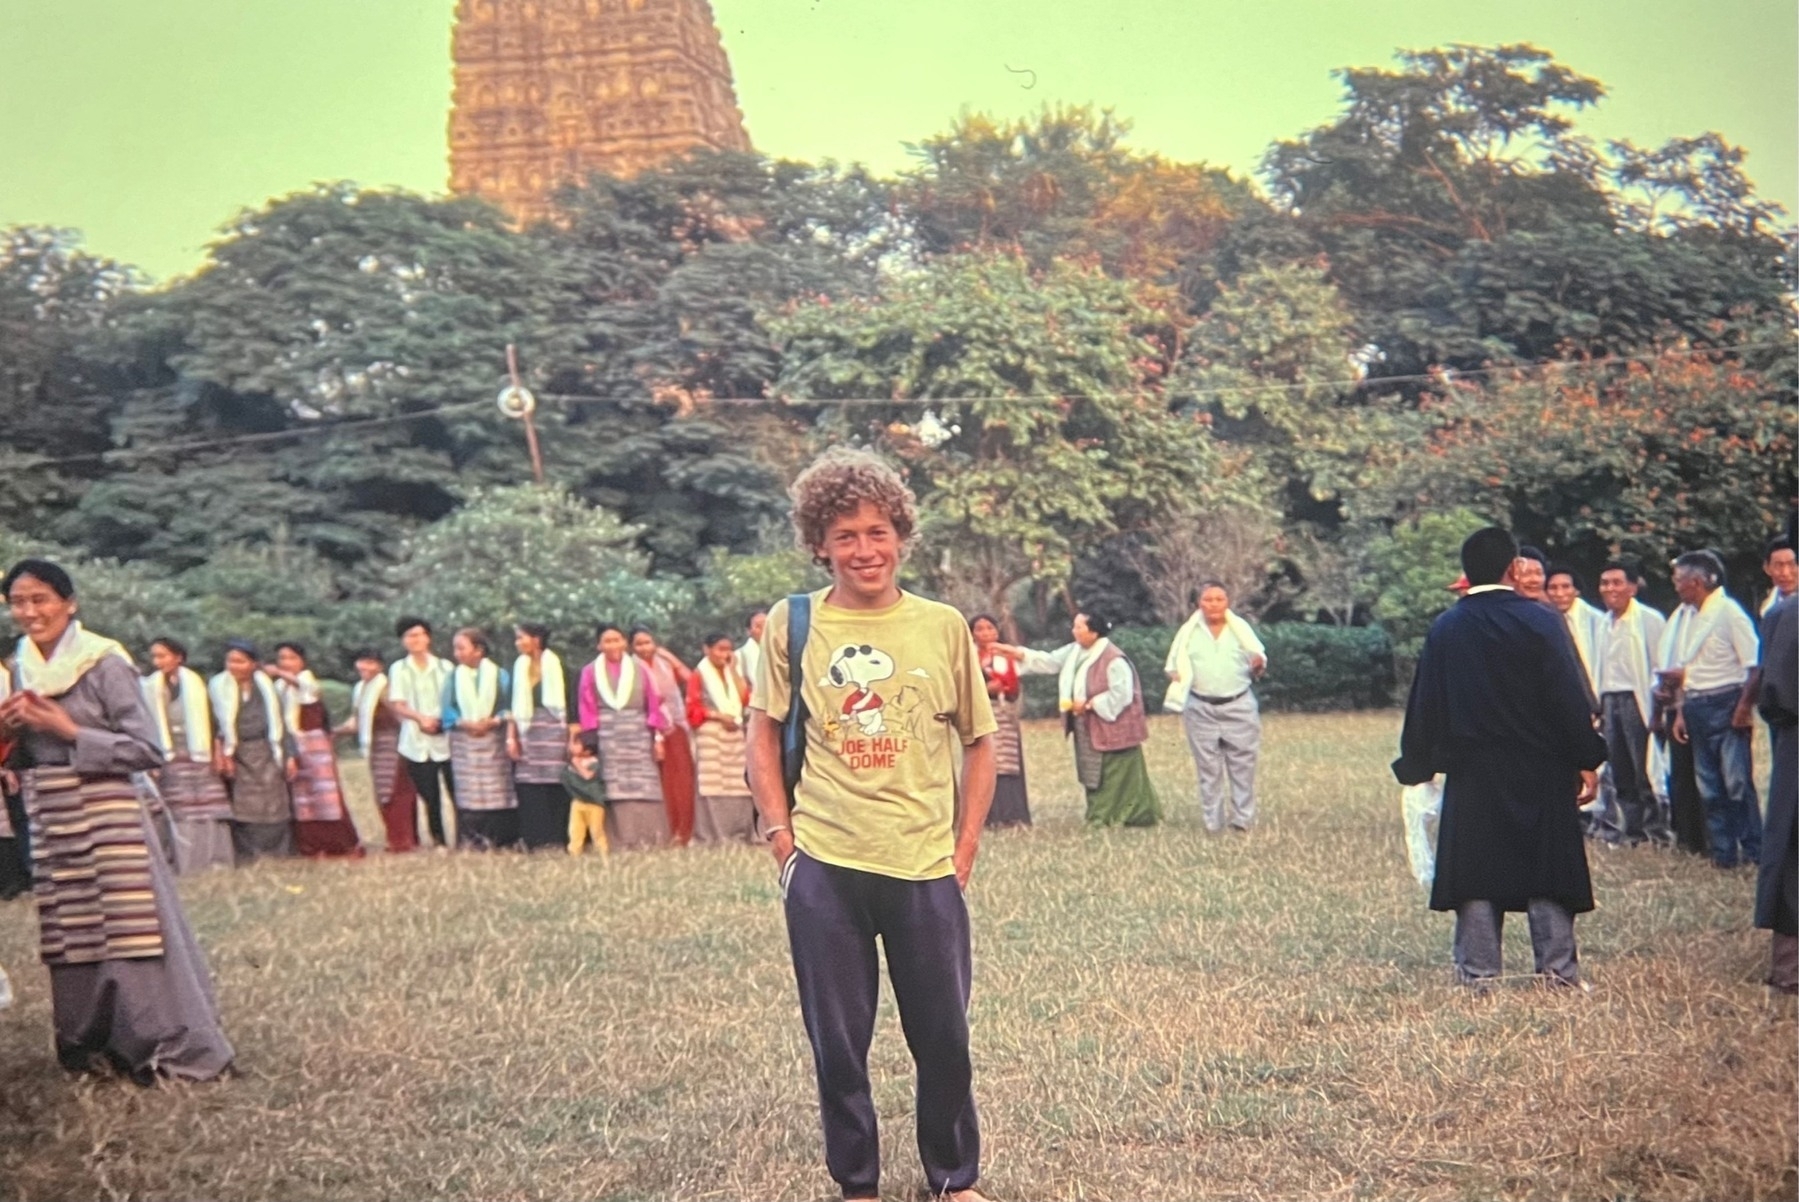 Me with Tibetan people in a field and the Mahabodhi Temple behind